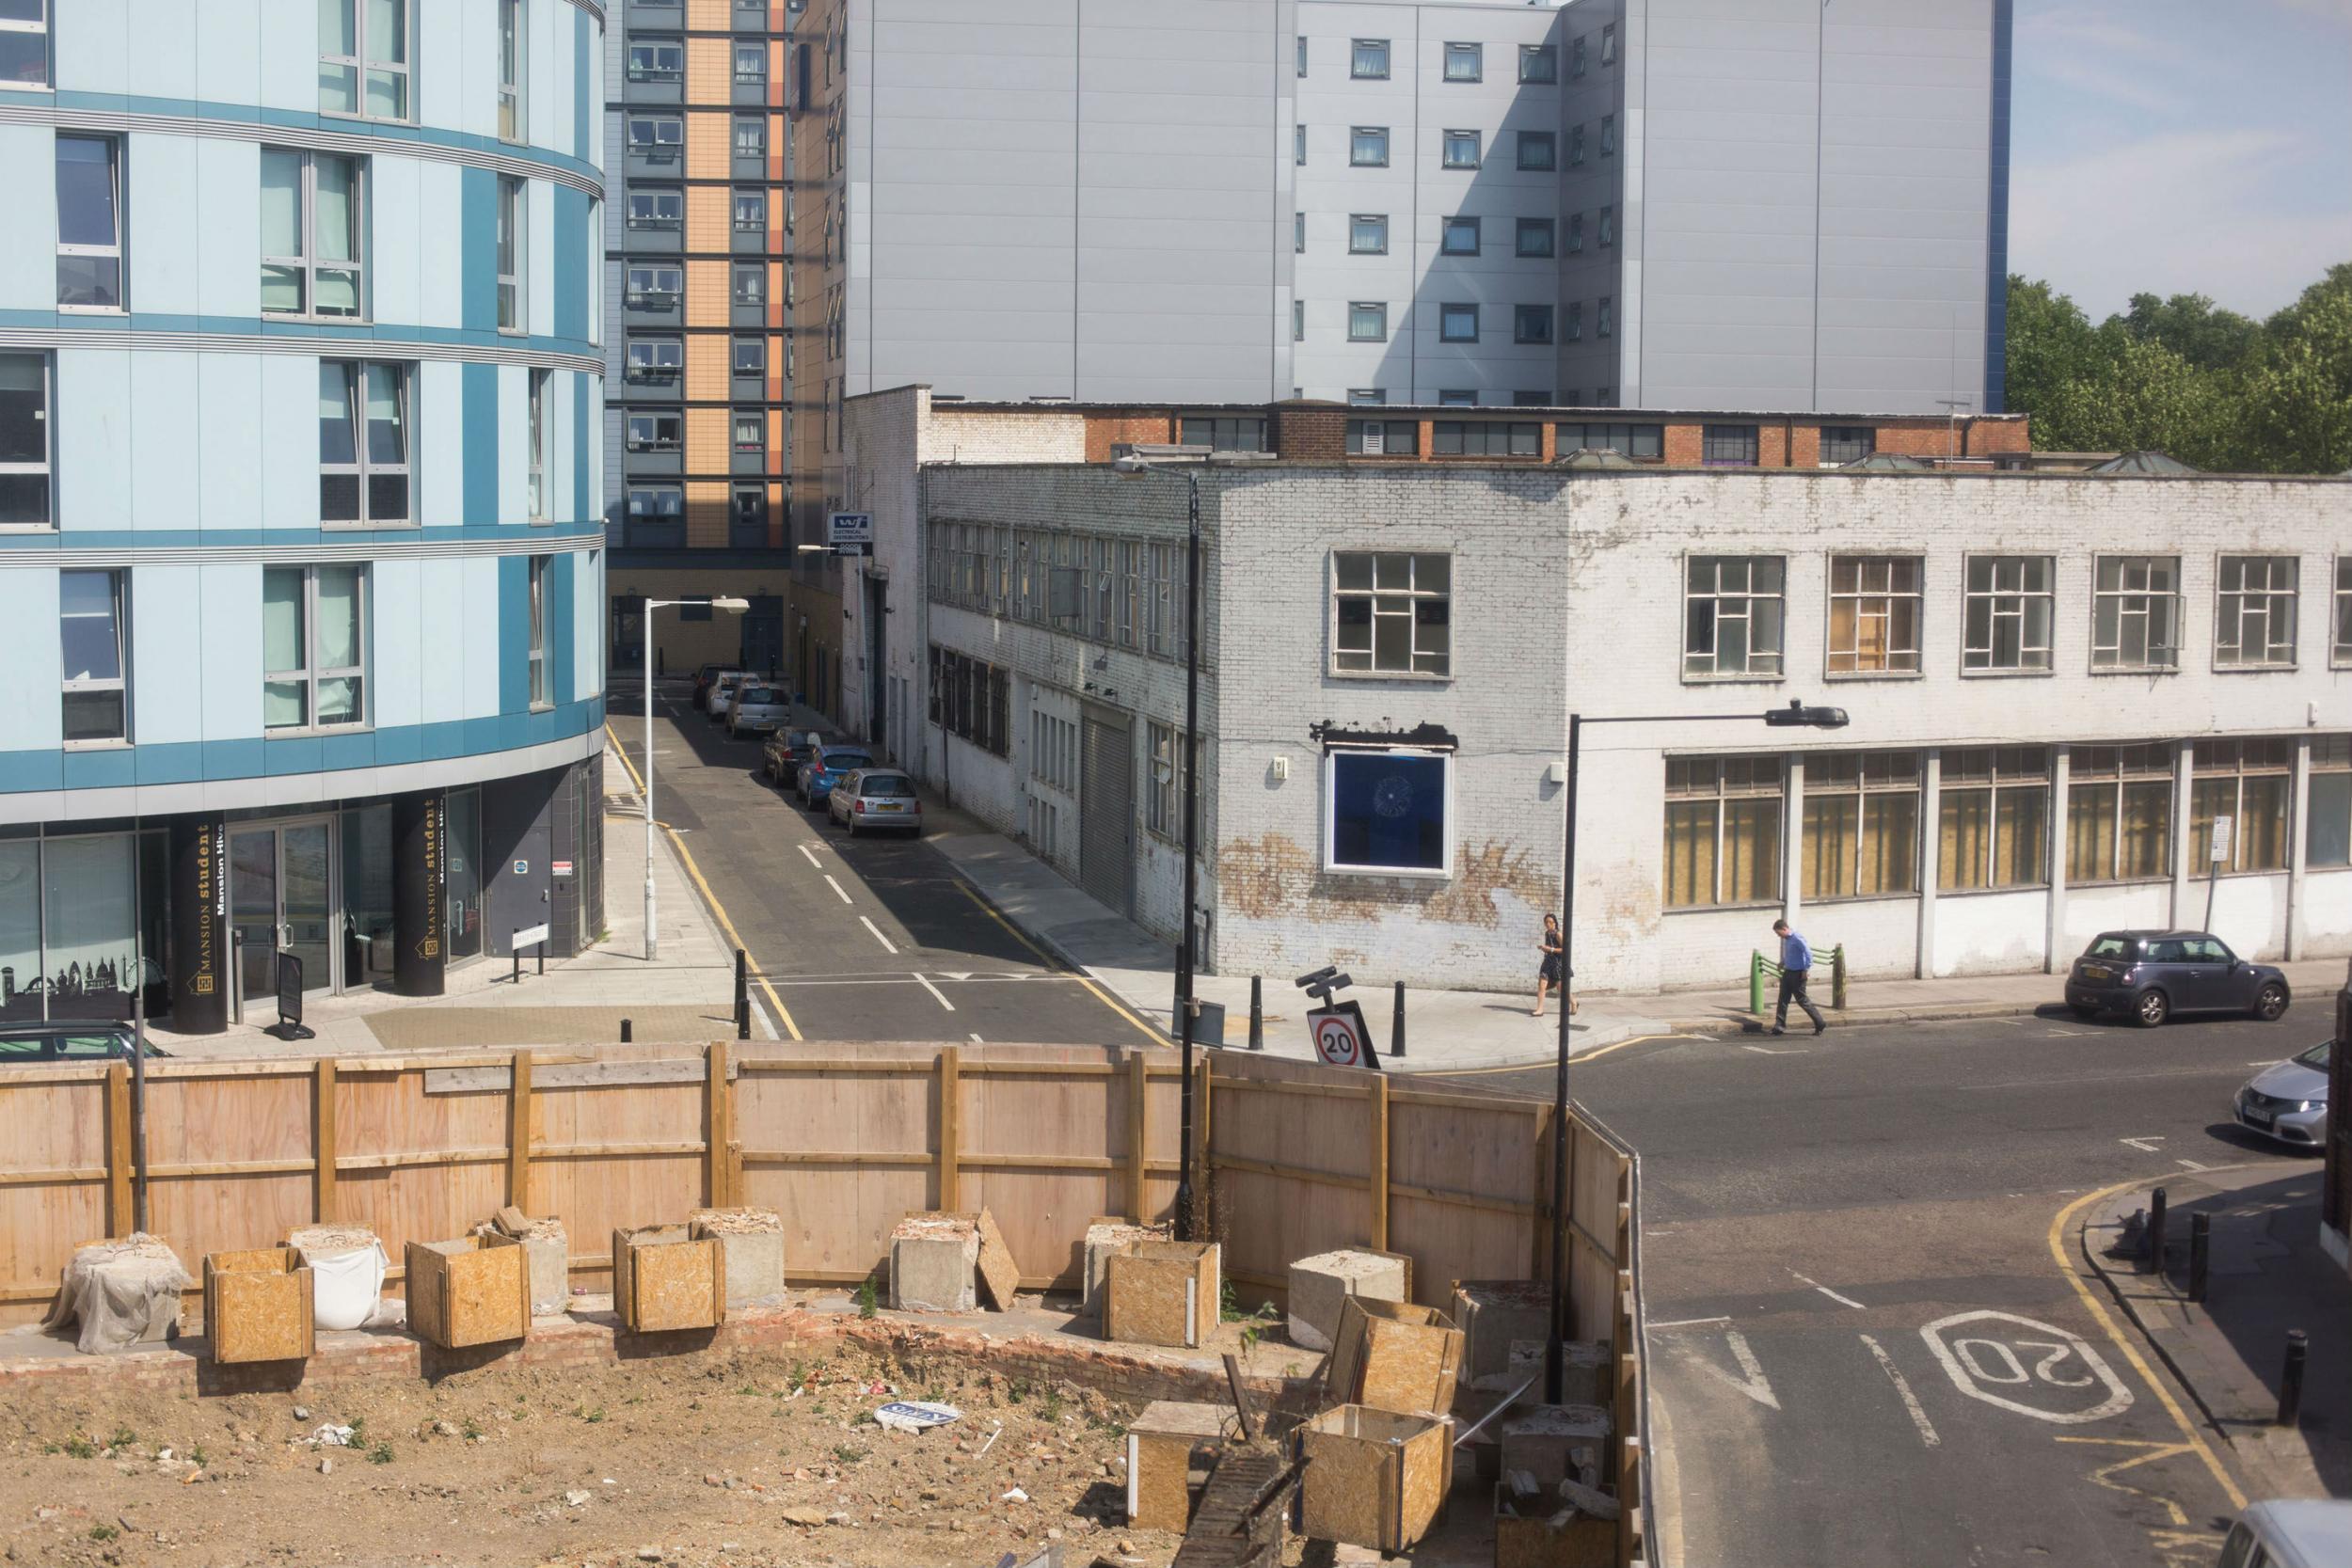 Wolfgang Tillmans ‘Shit buildings going up left, right and centre’, 2014